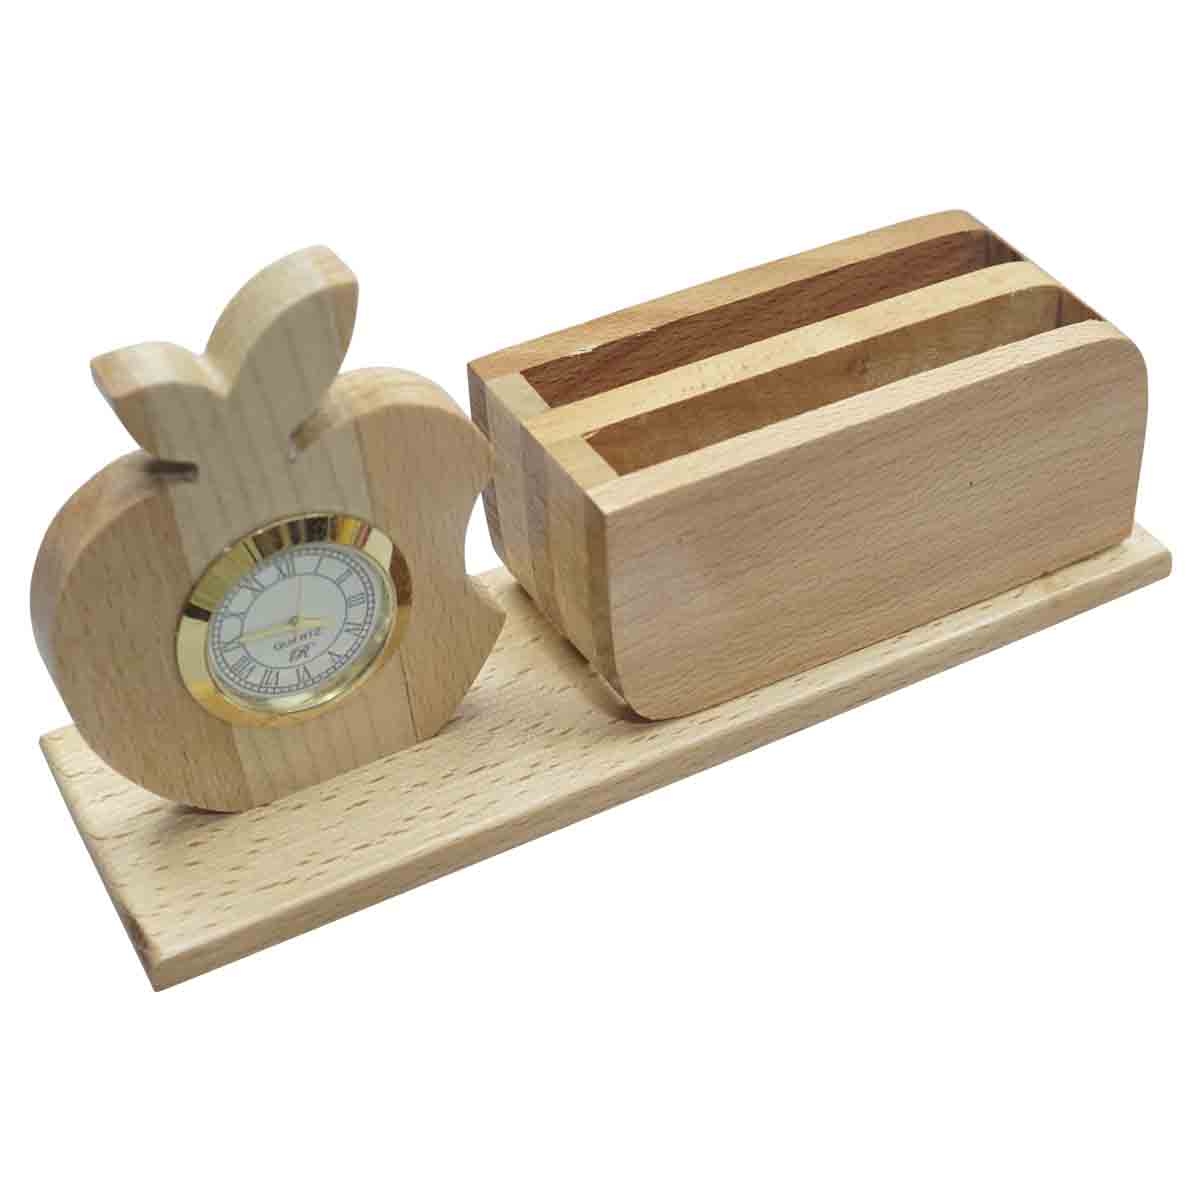 penhouse.in Apple Clock and Visiting Card Holder wooden stand with customization SKU - 87133